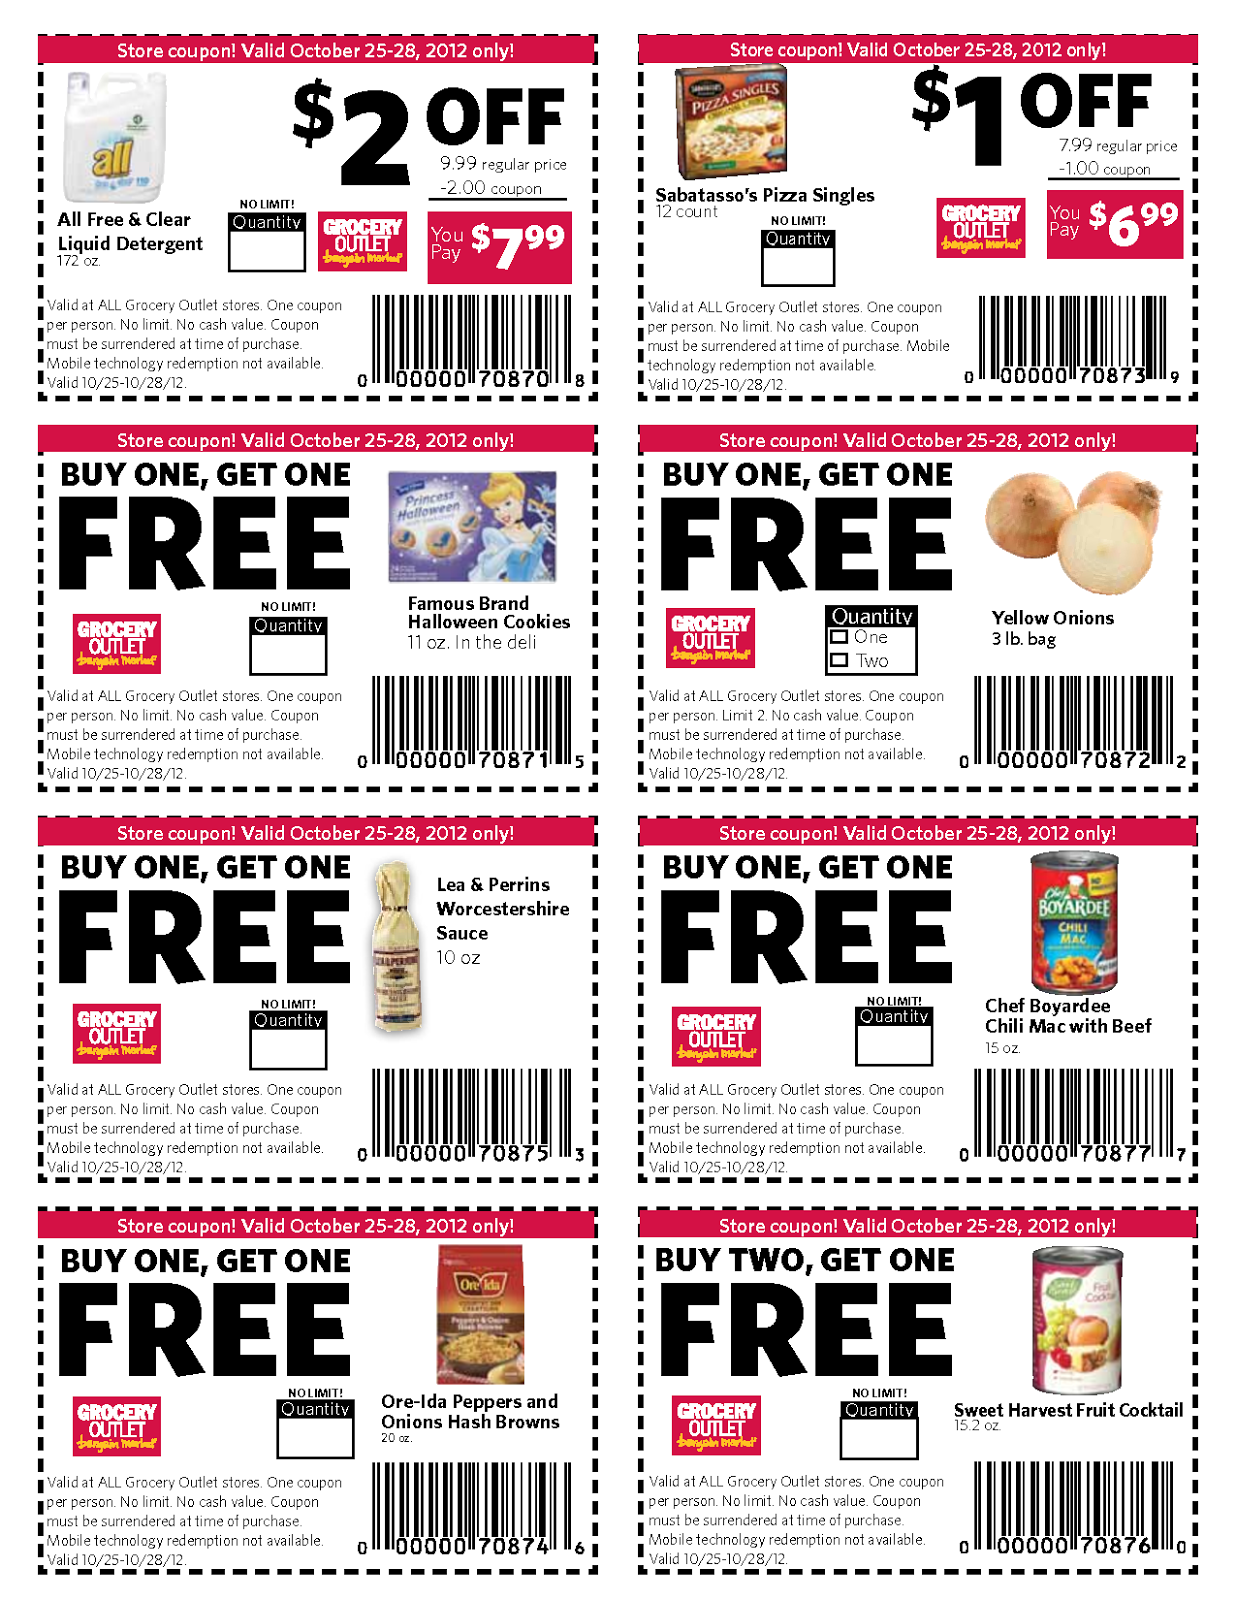 printable-free-online-grocery-coupons-printable-templates